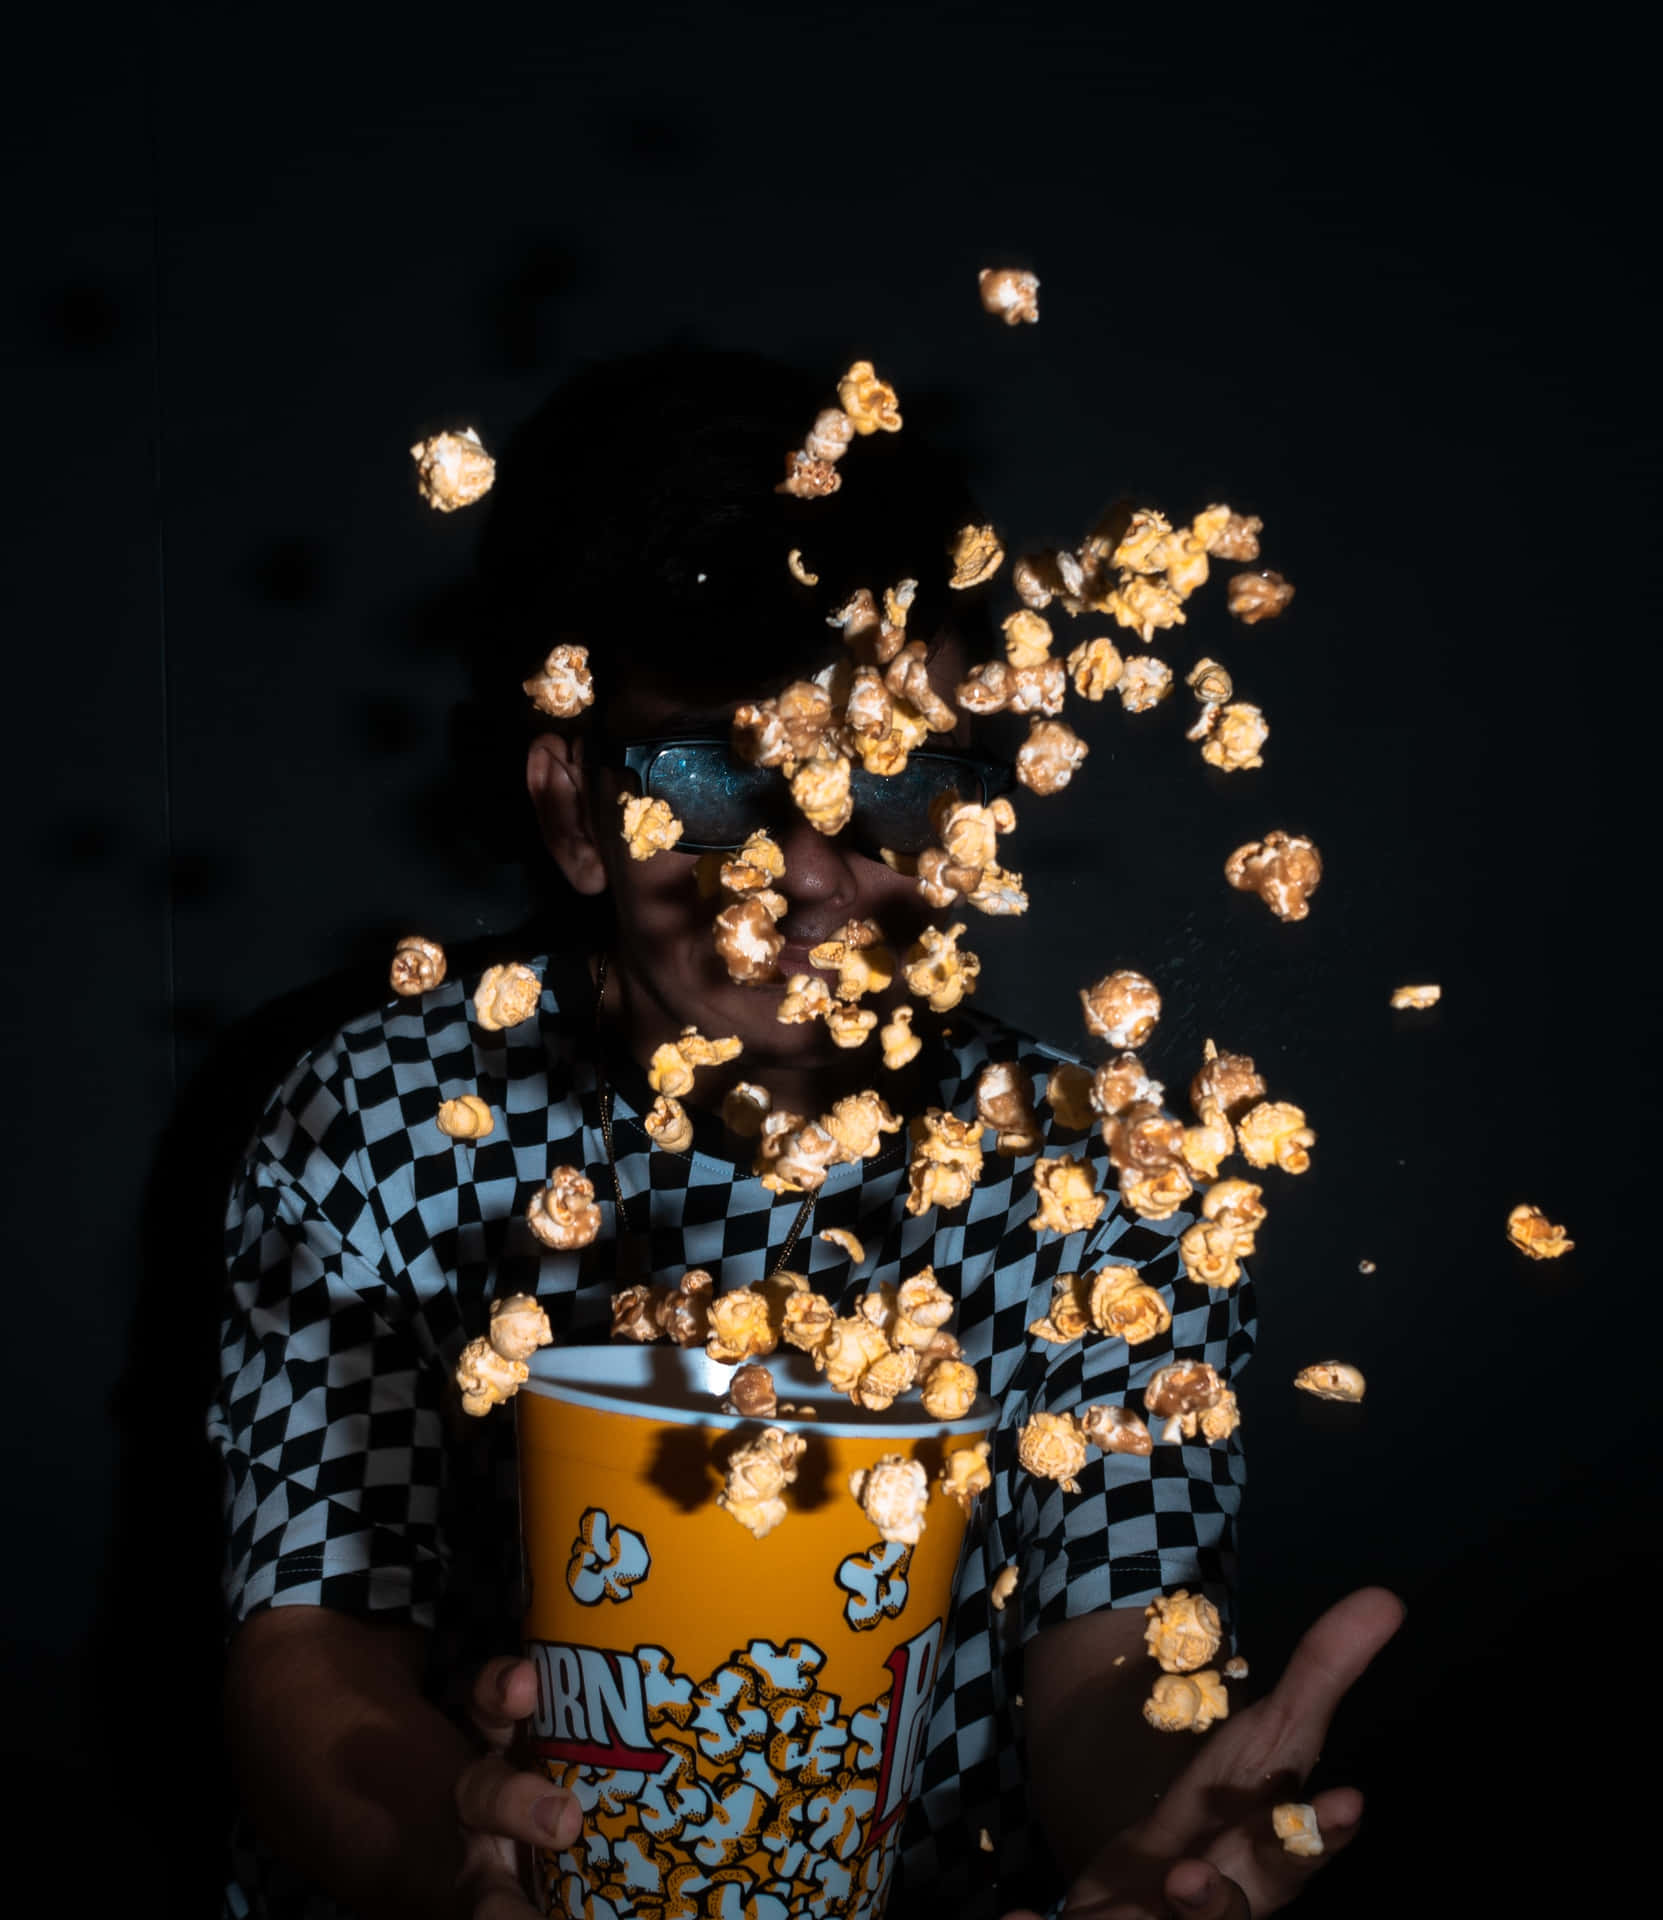 A Man Is Throwing Popcorn Into A Bucket